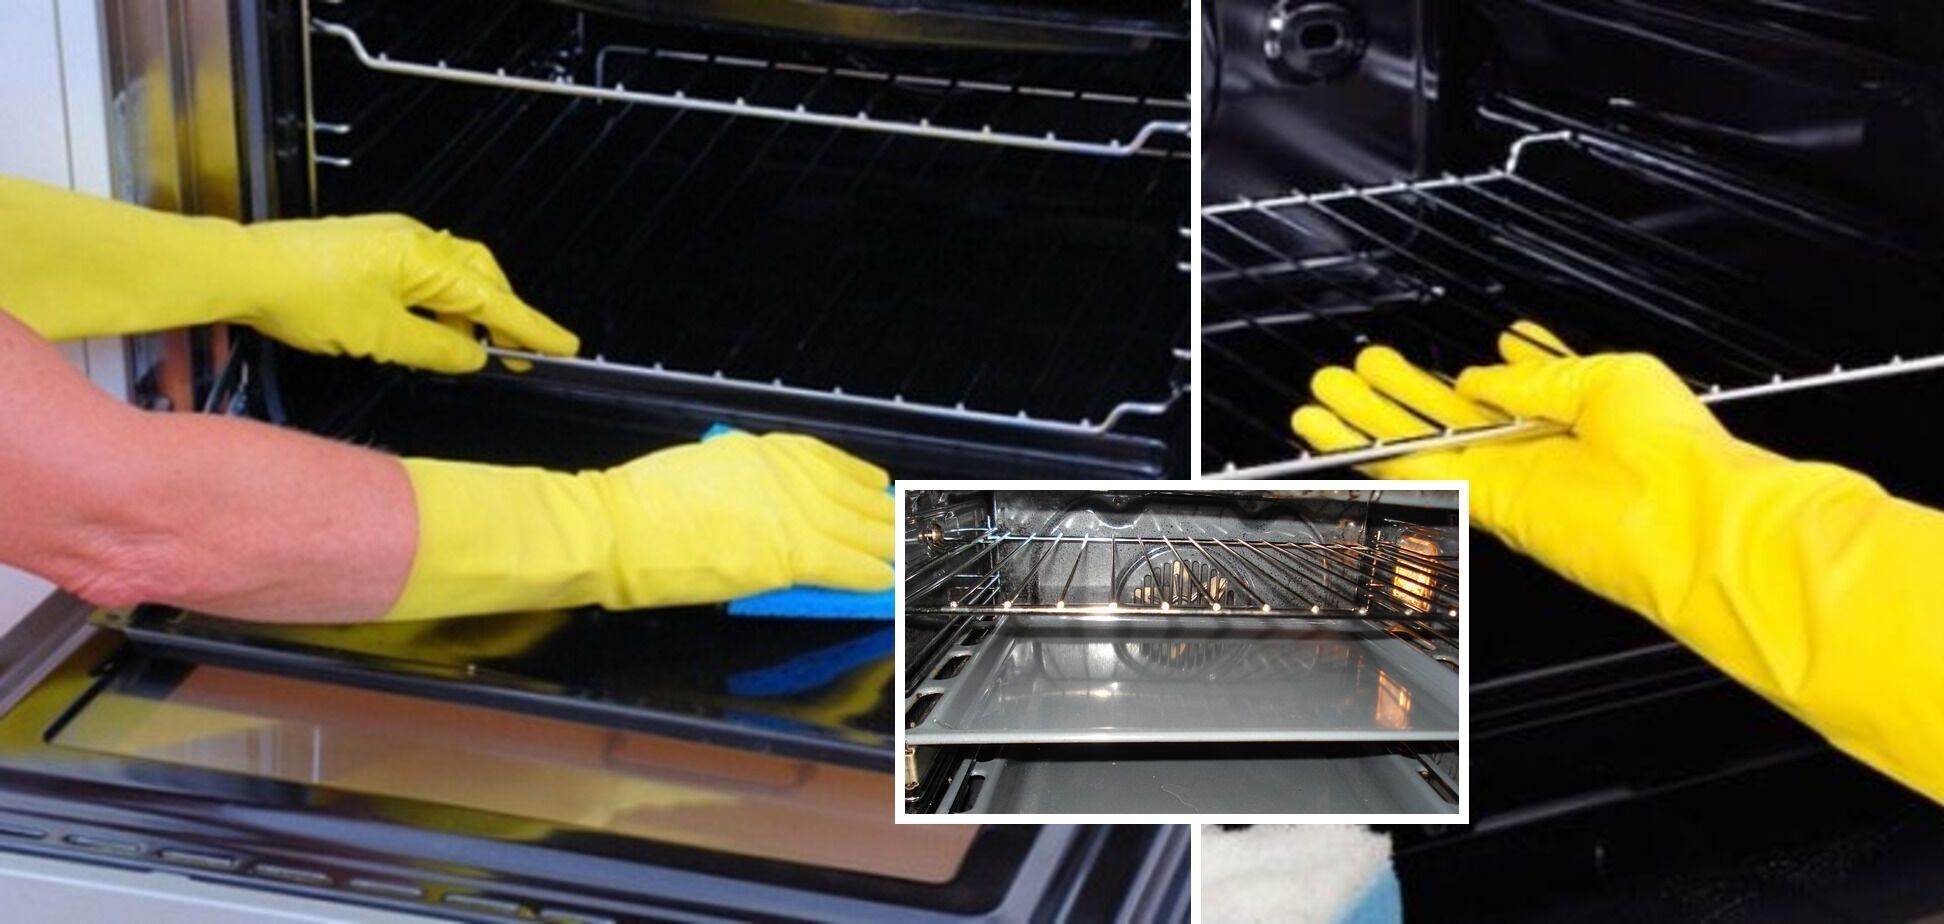 How to clean the oven grids and the oven from grease